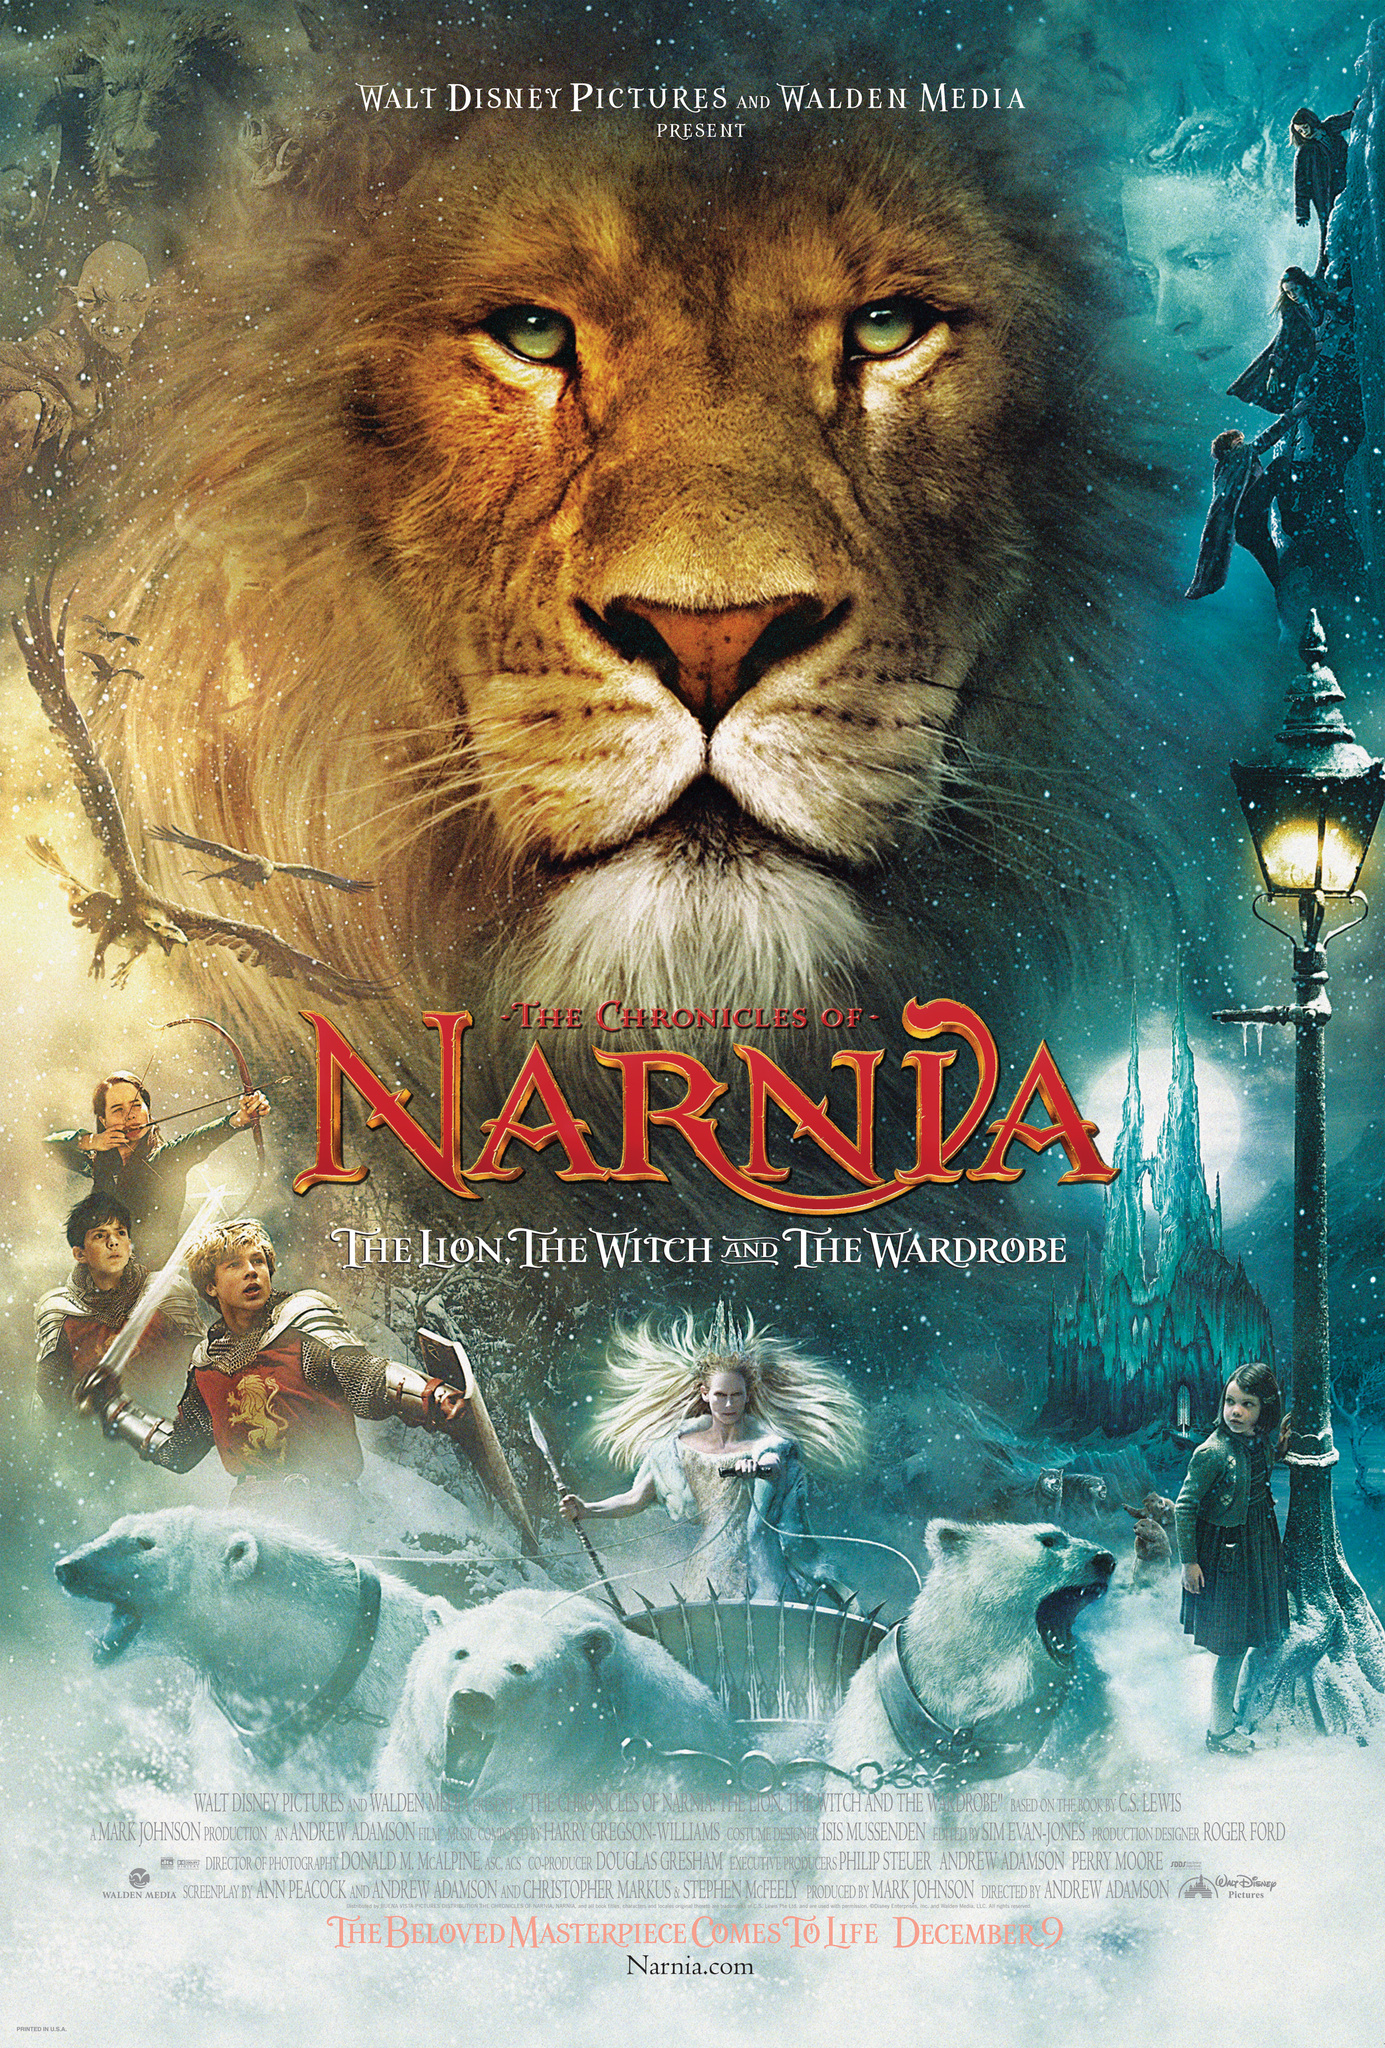 Image of "The Chronicles of Narnia: The Lion, the Witch and the Wardrobe"